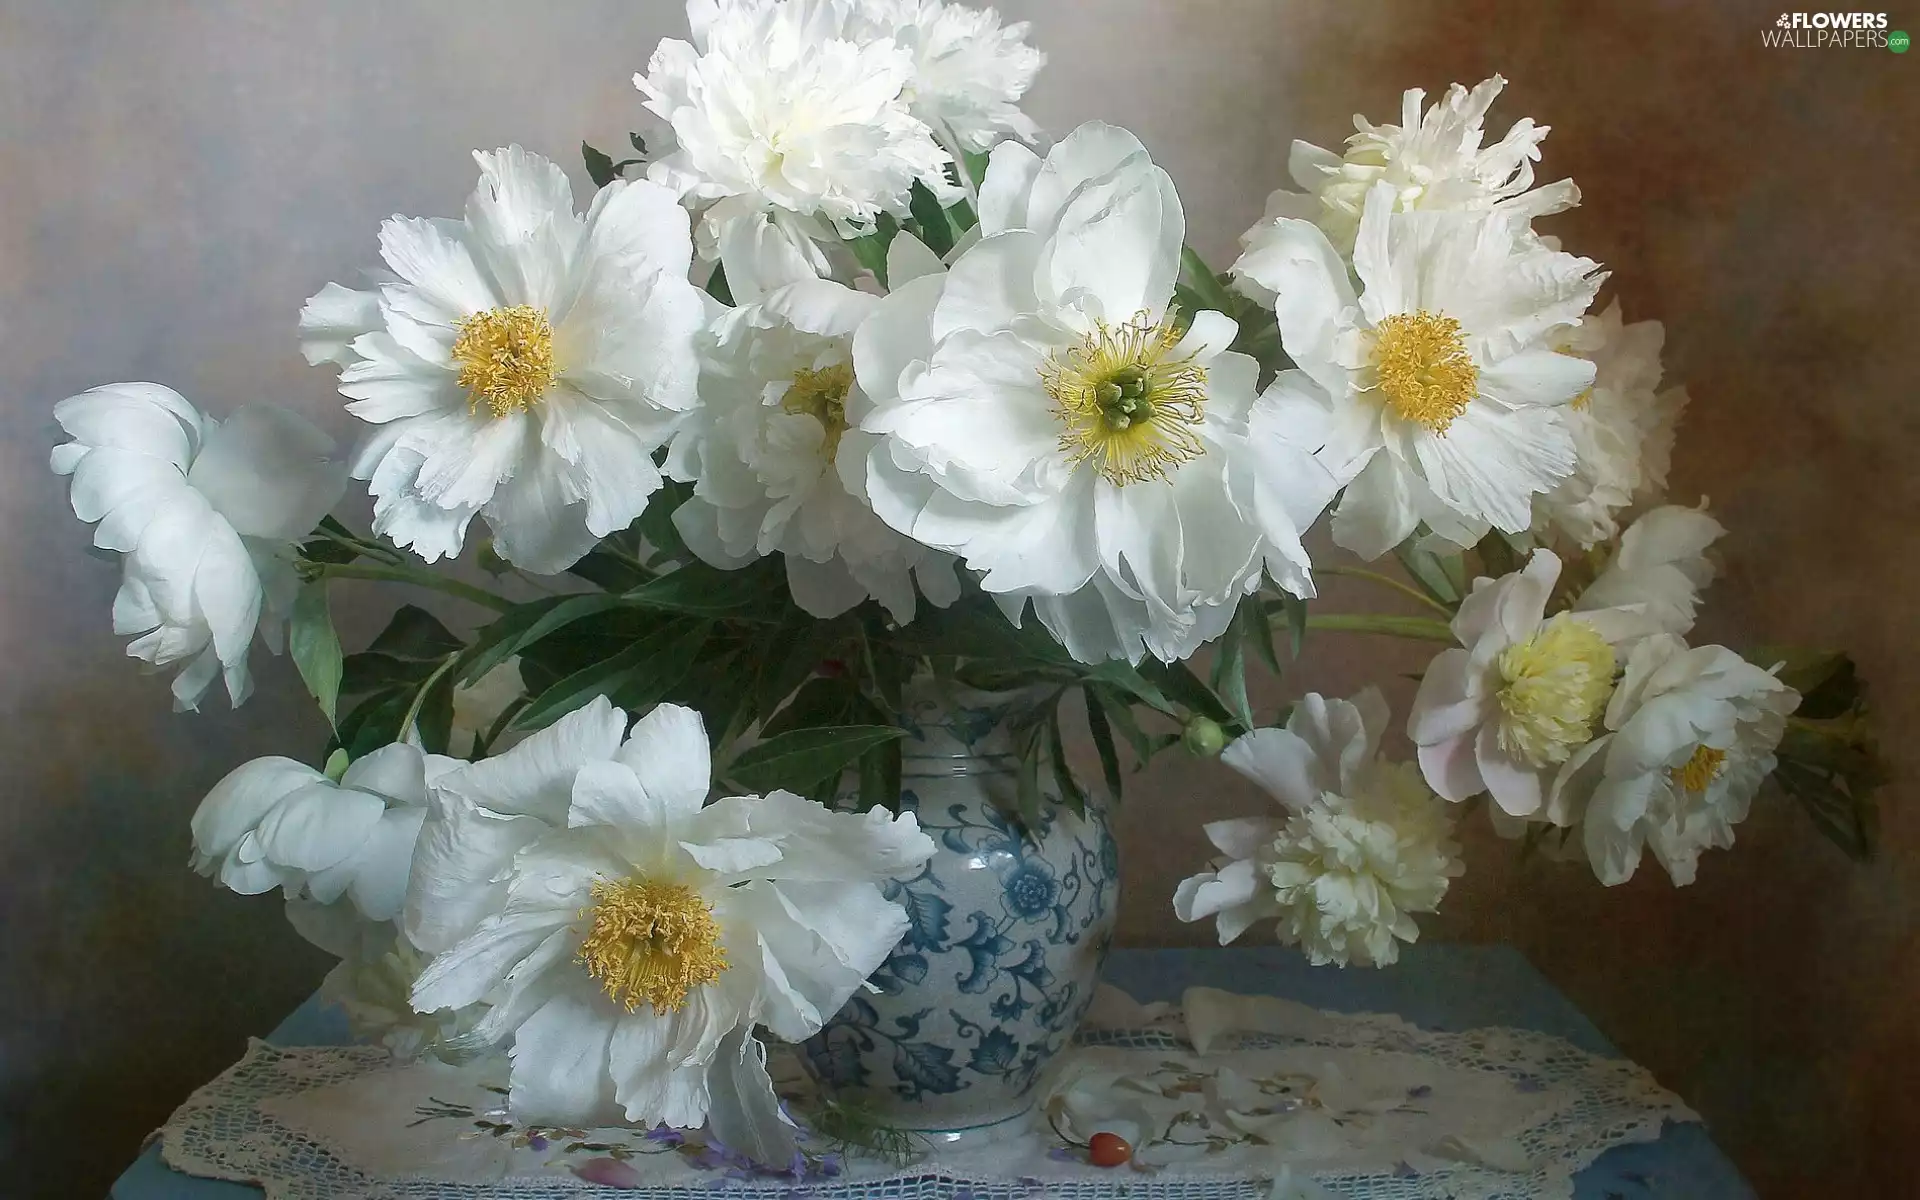 Peonies, Flowers, tablecloth, Table, Vase, White